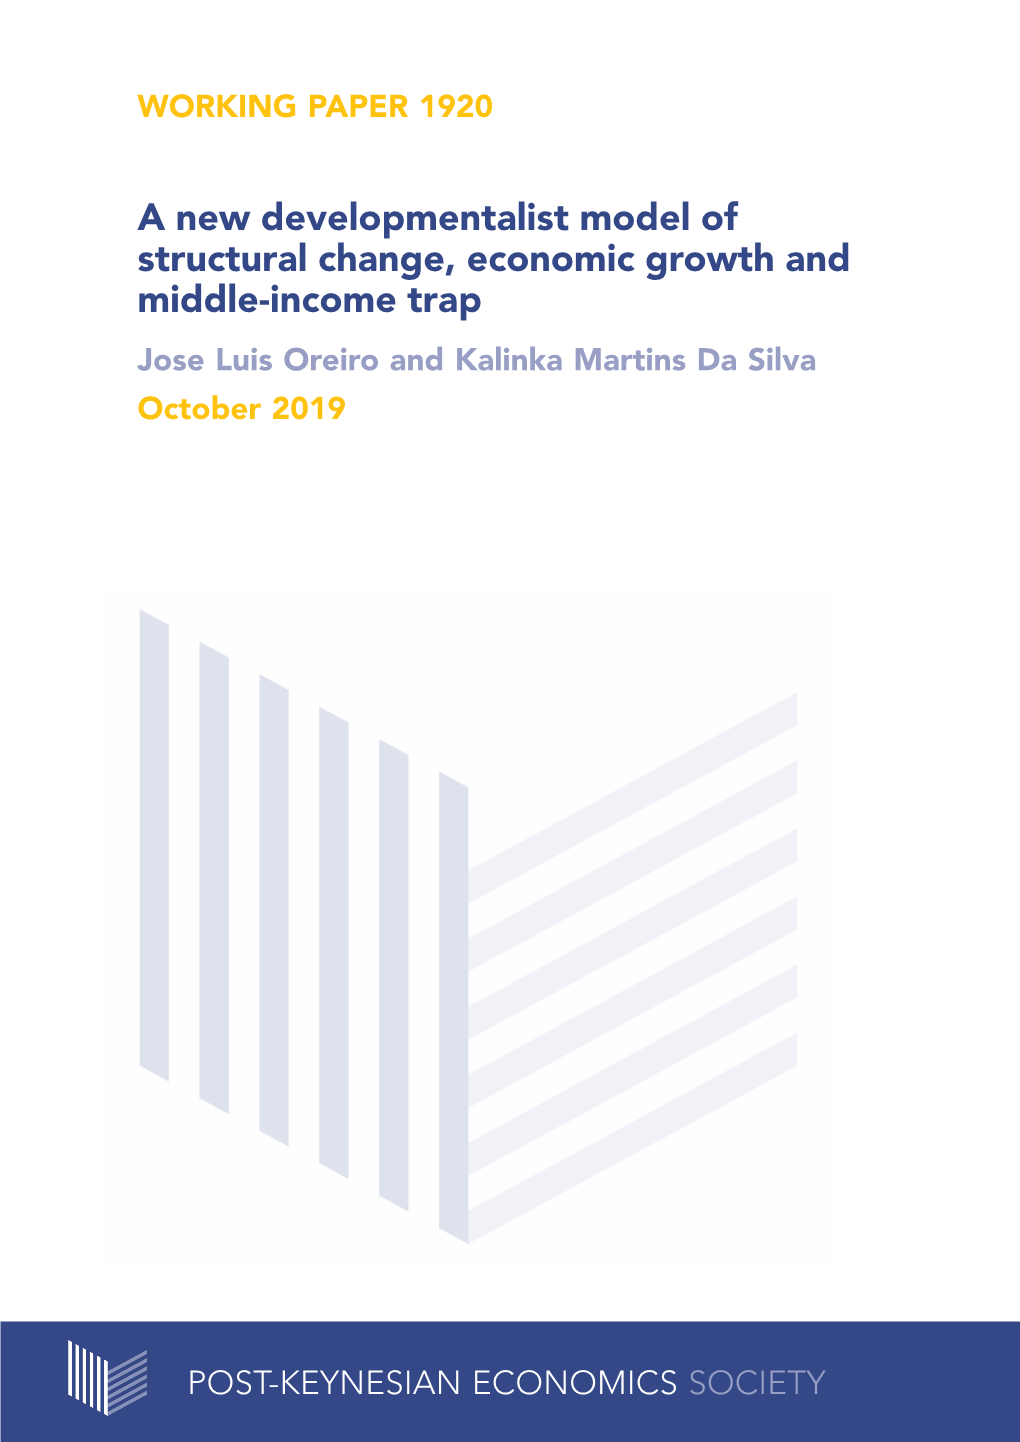 A New Developmentalist Model of Structural Change, Economic Growth and Middle-Income Trap Jose Luis Oreiro and Kalinka Martins Da Silva October 2019